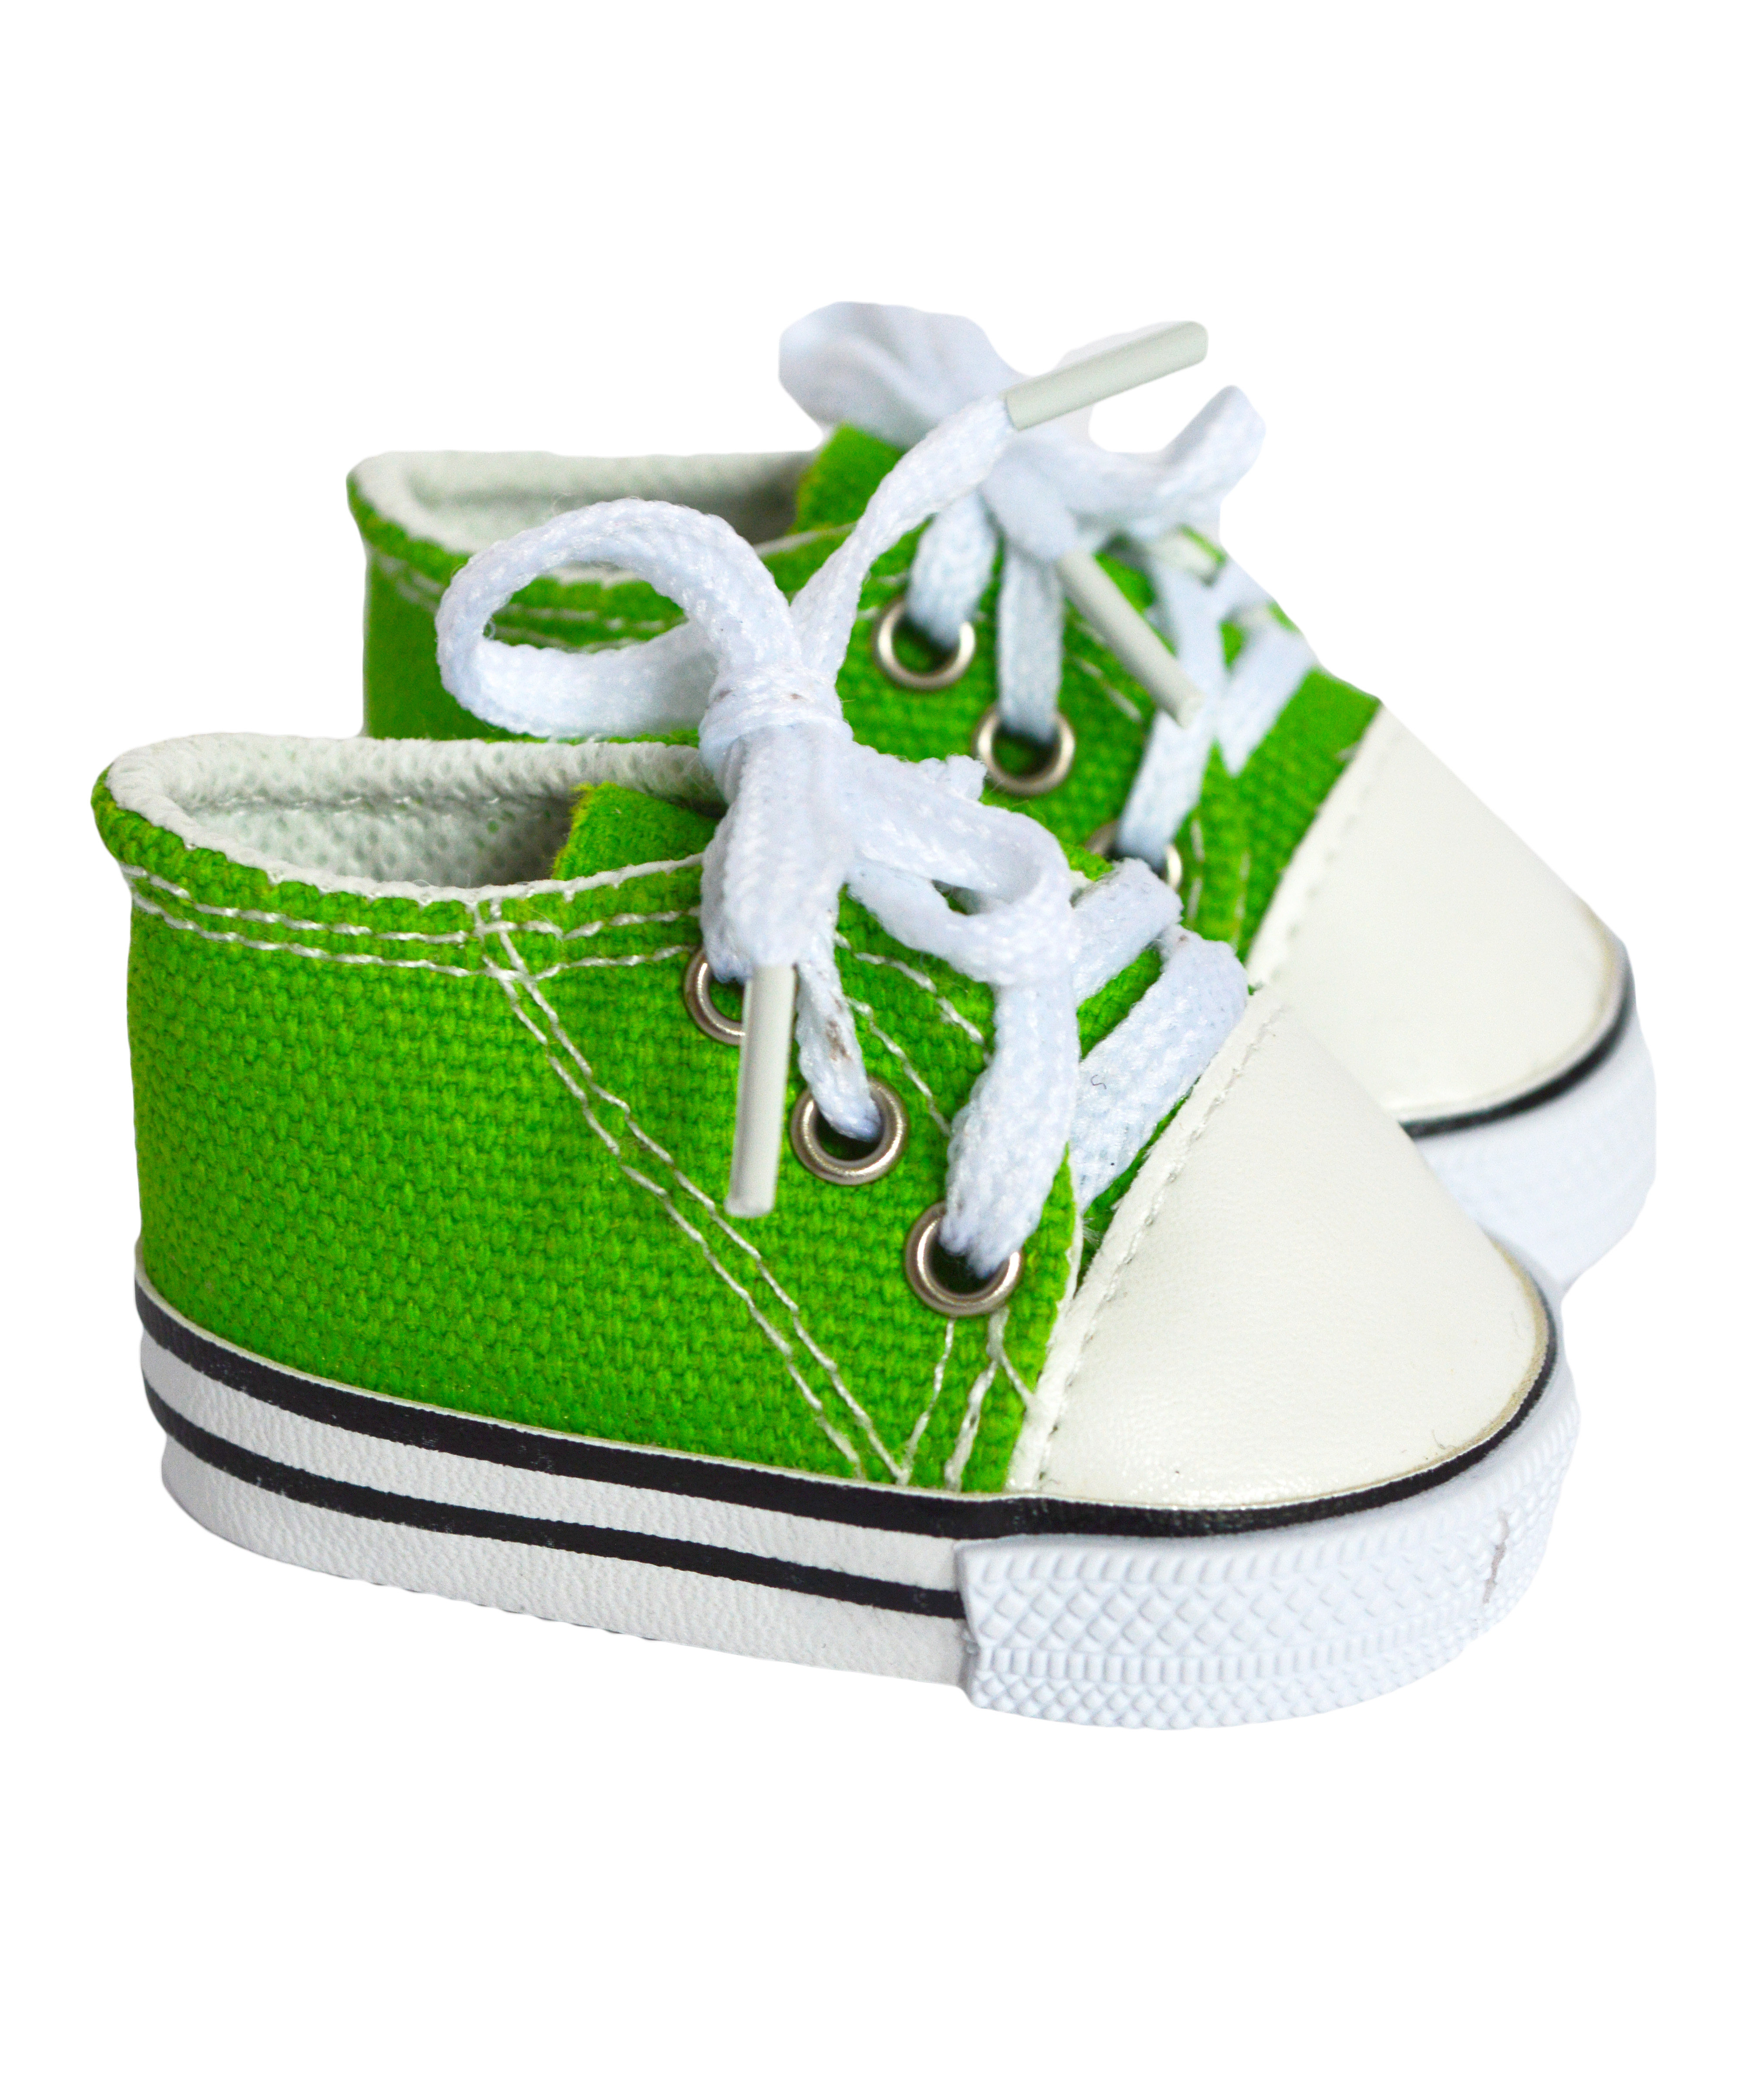 Tropical Green Tennis Shoes Fits American Girl Dolls